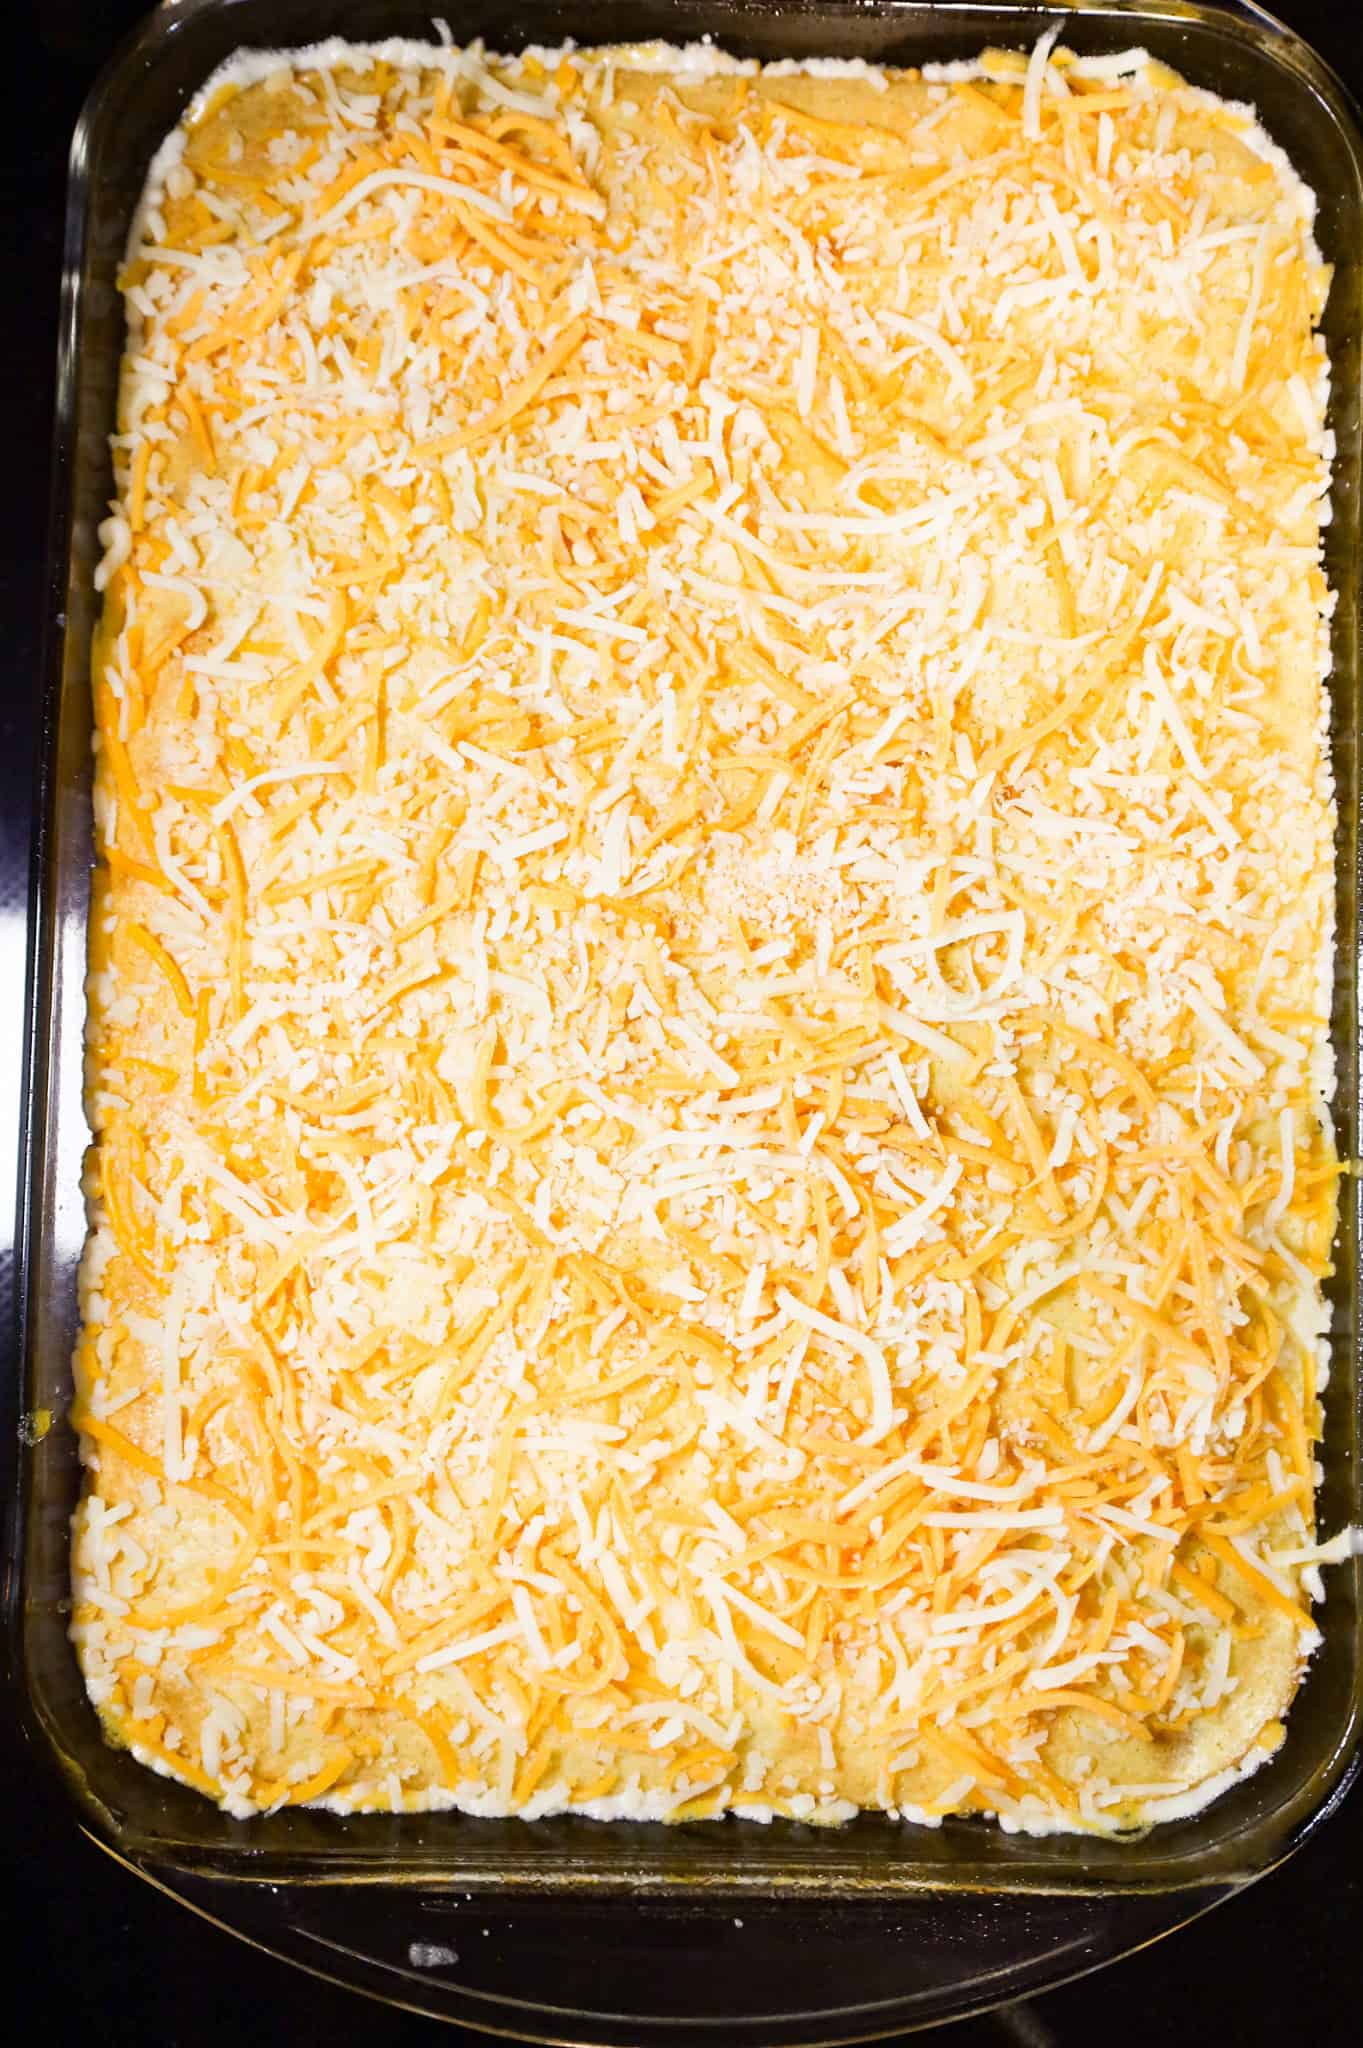 shredded cheese on top of cornbread casserole in a baking dish